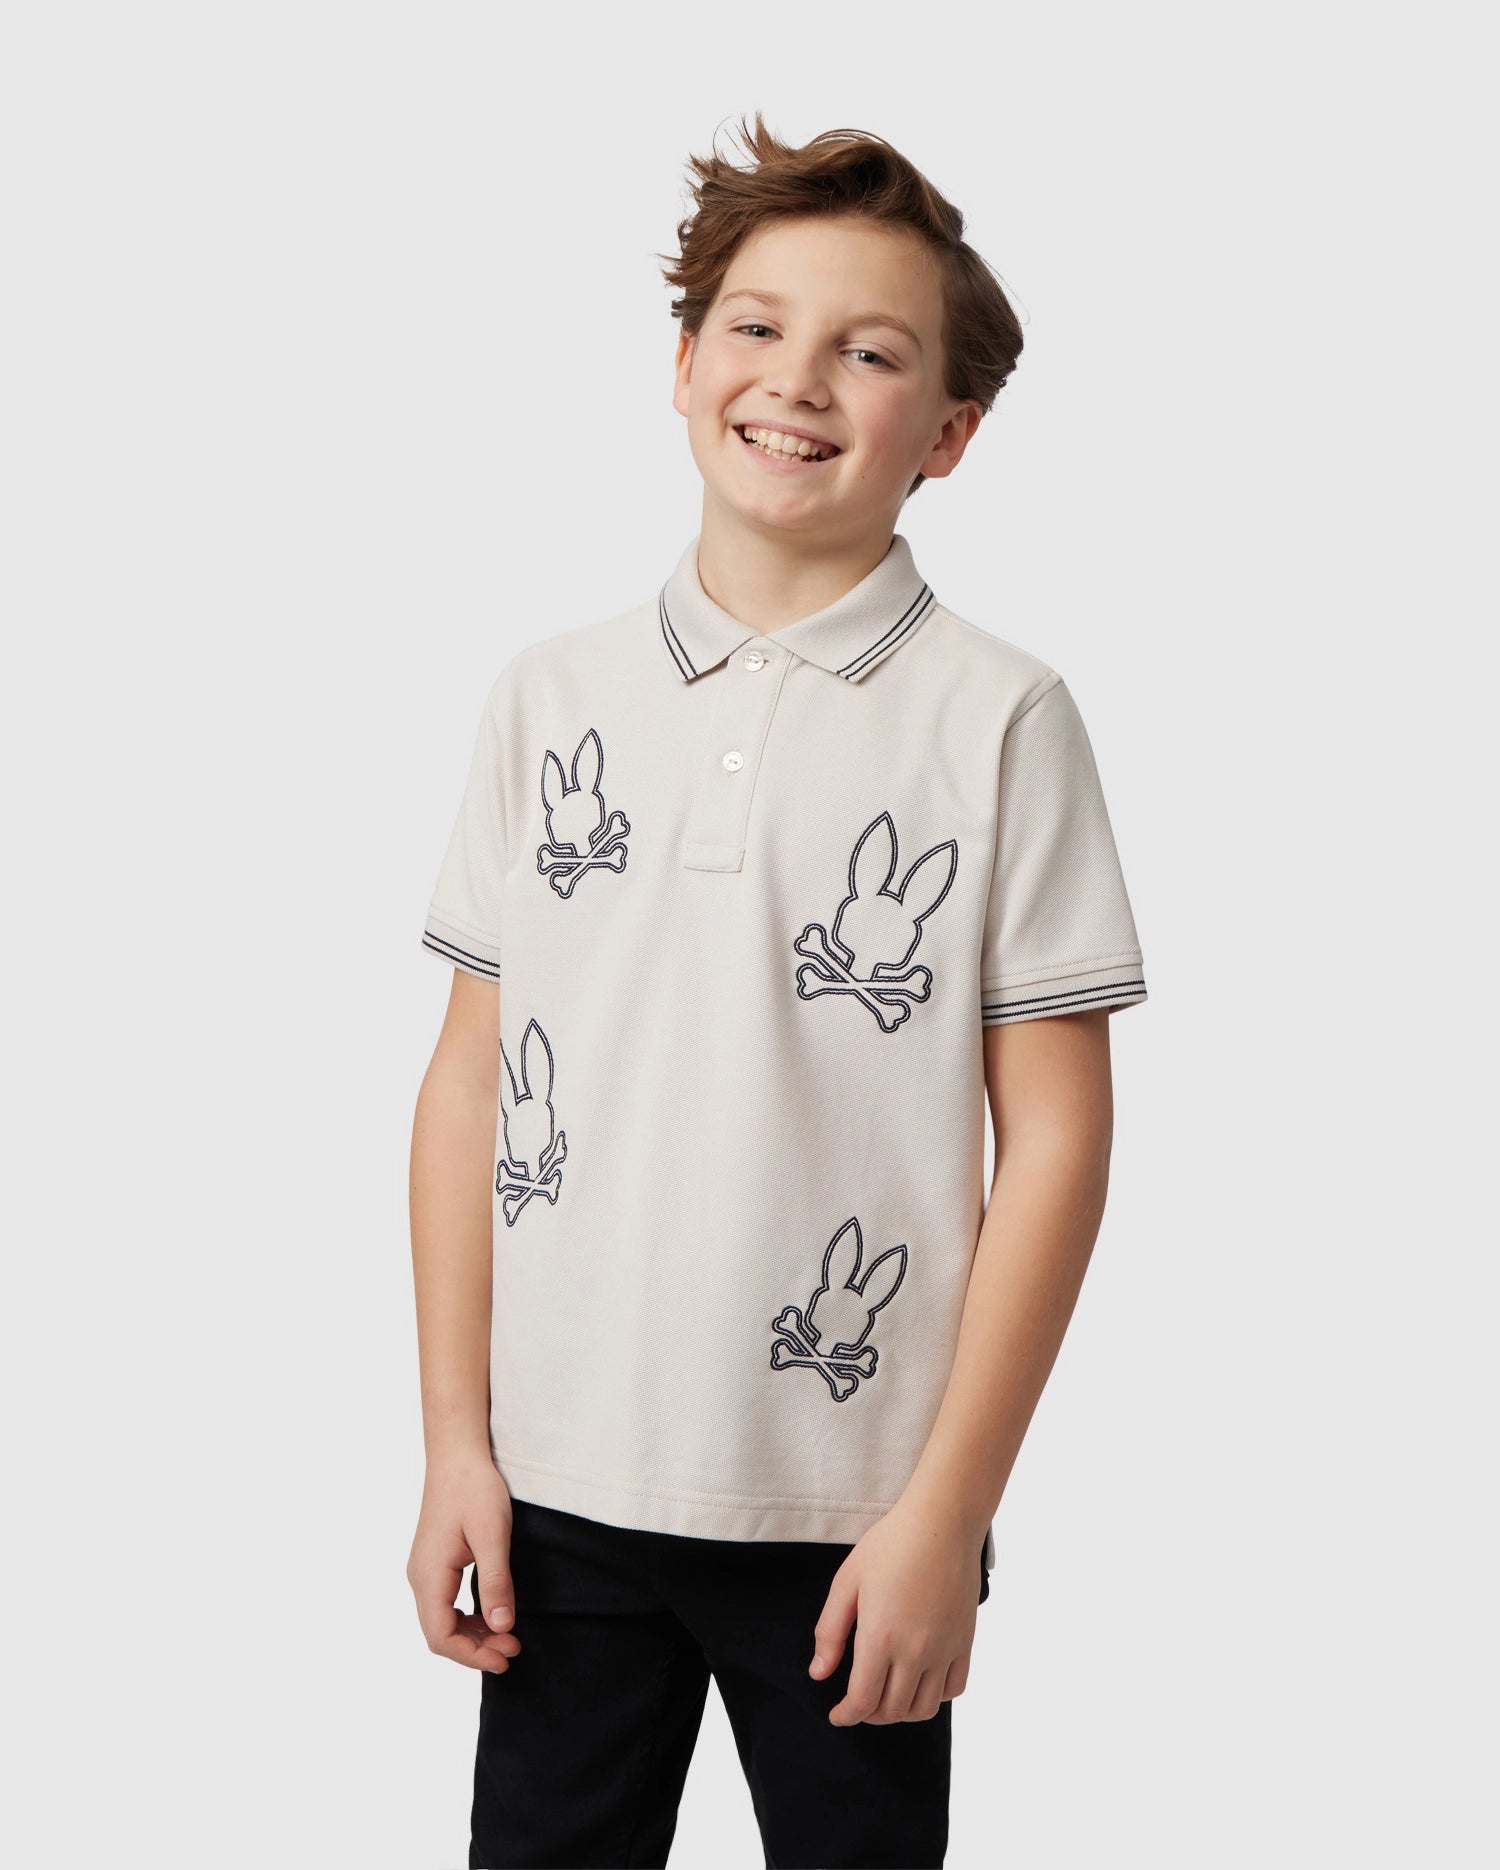 A young boy with light brown hair and a smile is wearing a Psycho Bunny KIDS MILTON PIQUE POLO SHIRT - B0K284B200 adorned with black, stylized bunny skull designs. The beige Pima cotton piqué shirt has a buttoned collar and black trim on the sleeves. He stands against a plain, light gray background.